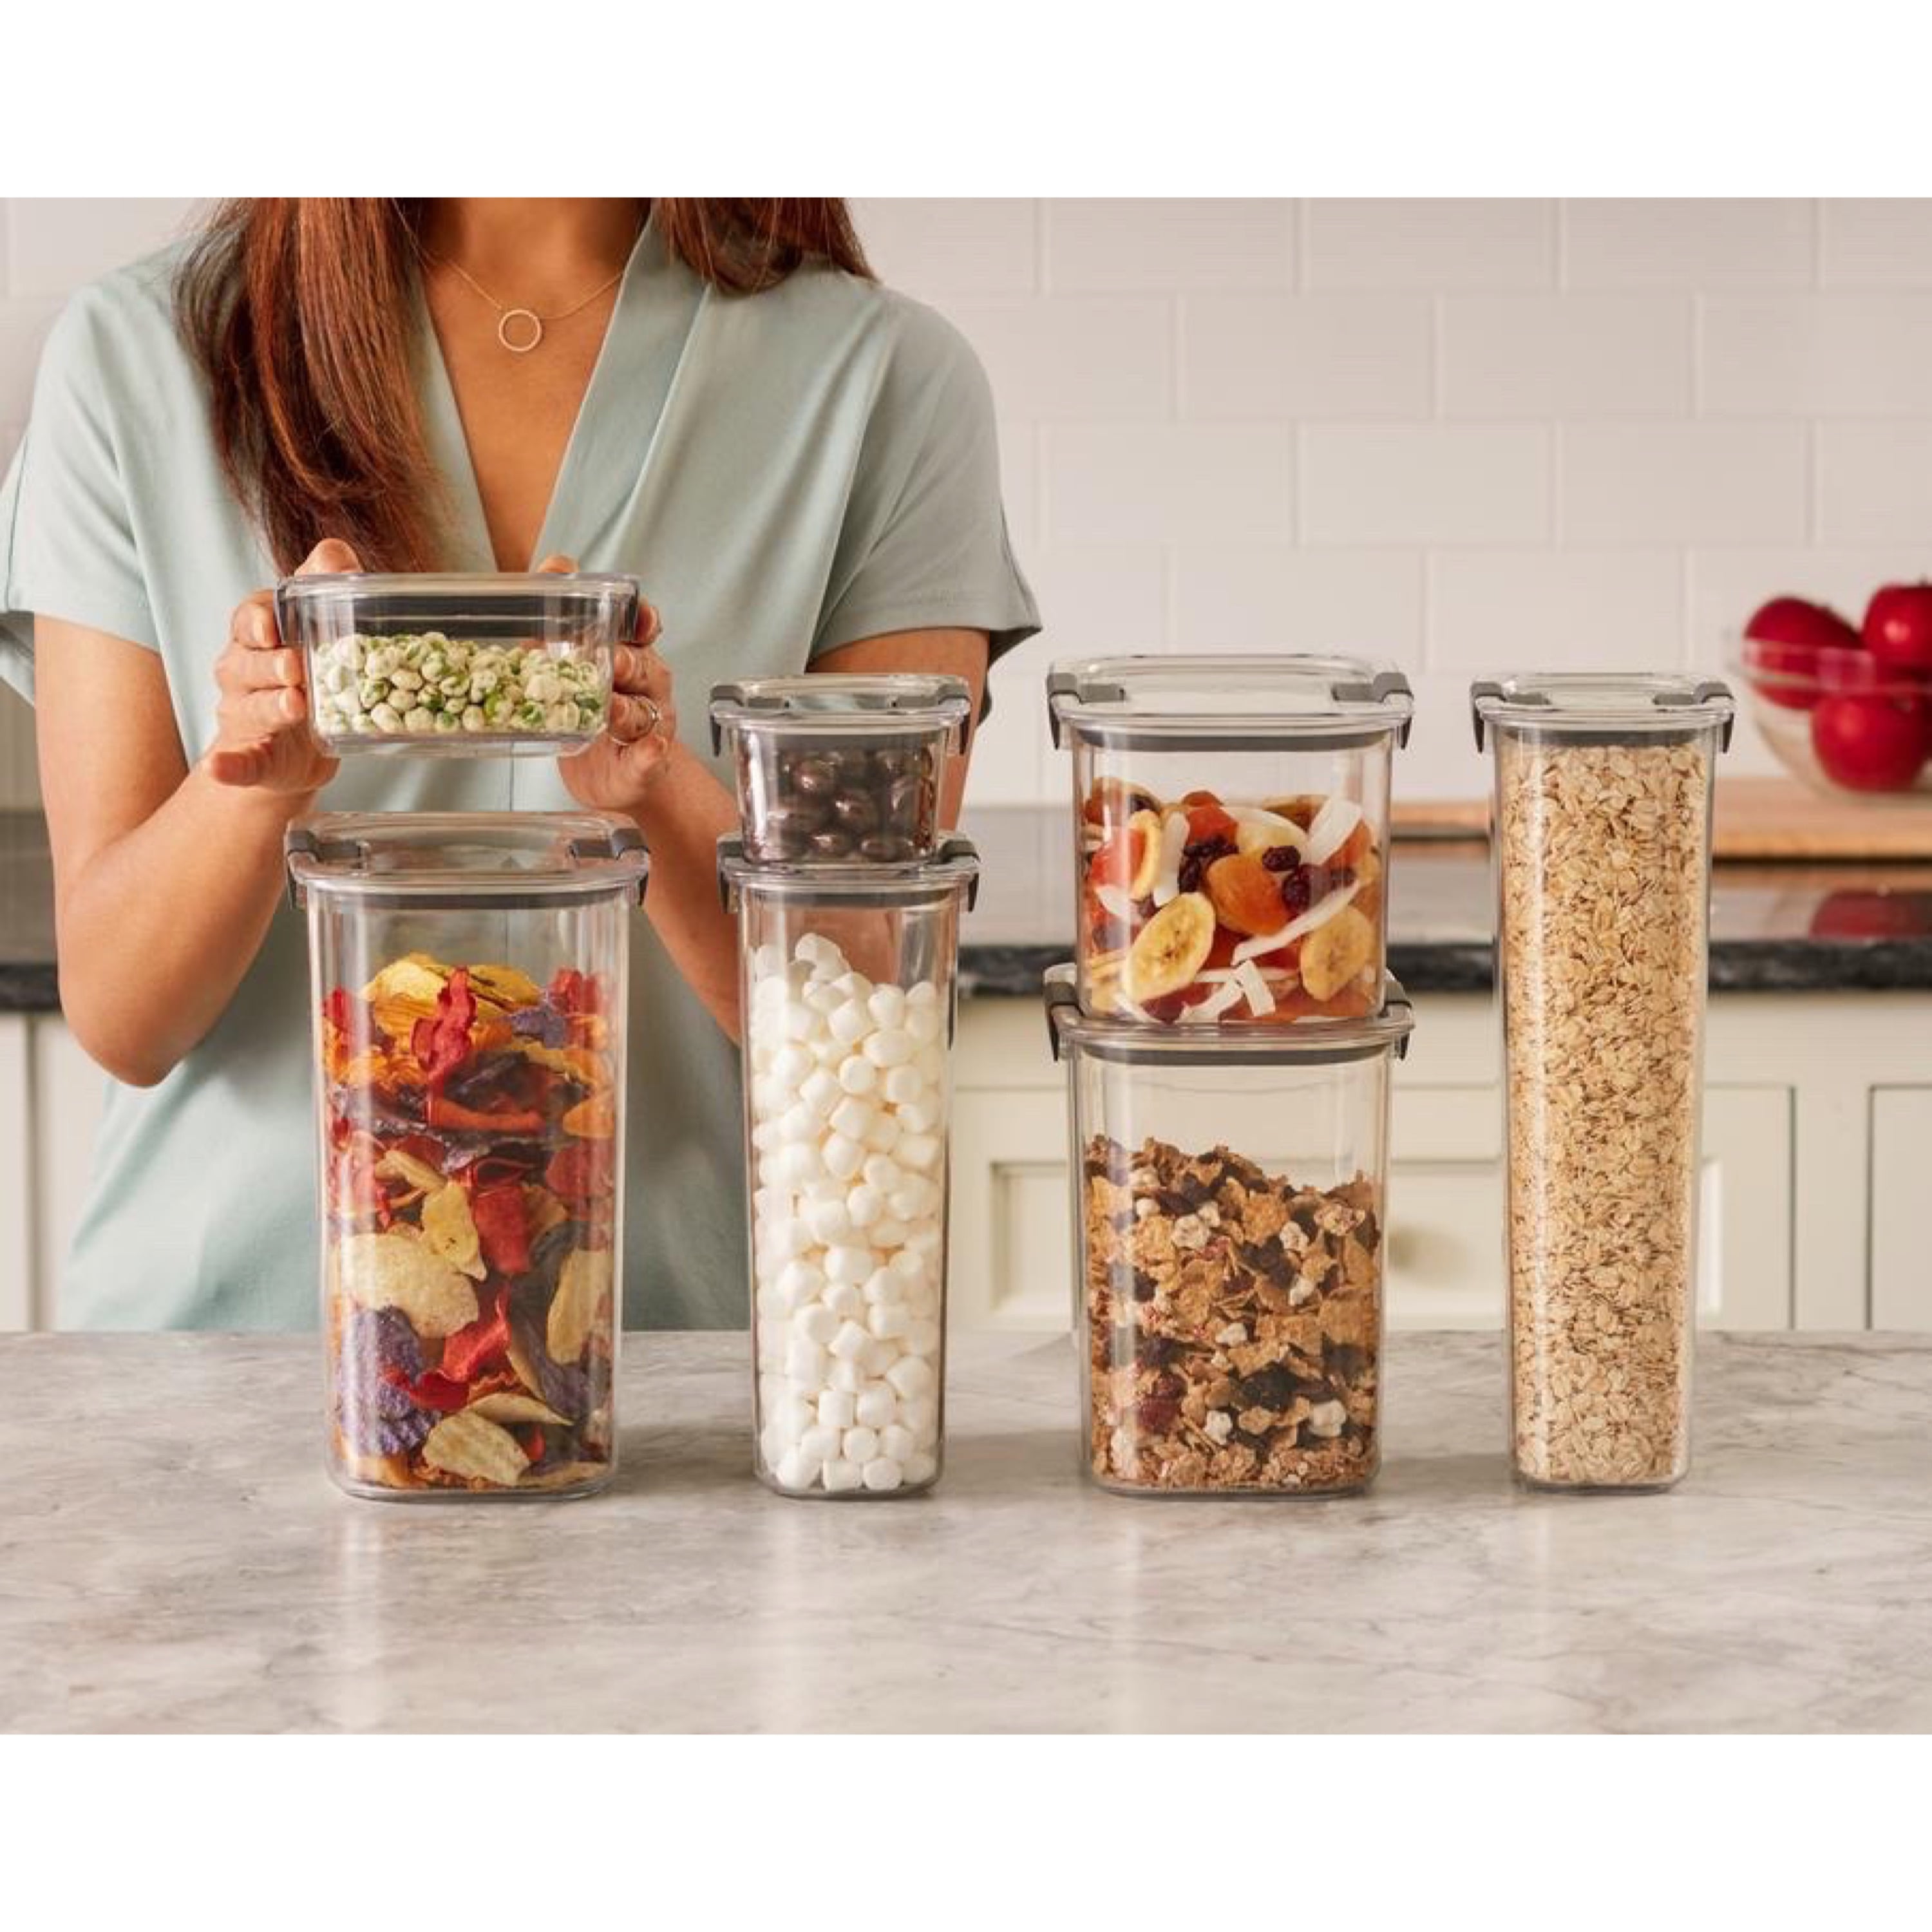 Refresh the pantry with a new low on 14 Rubbermaid Containers at